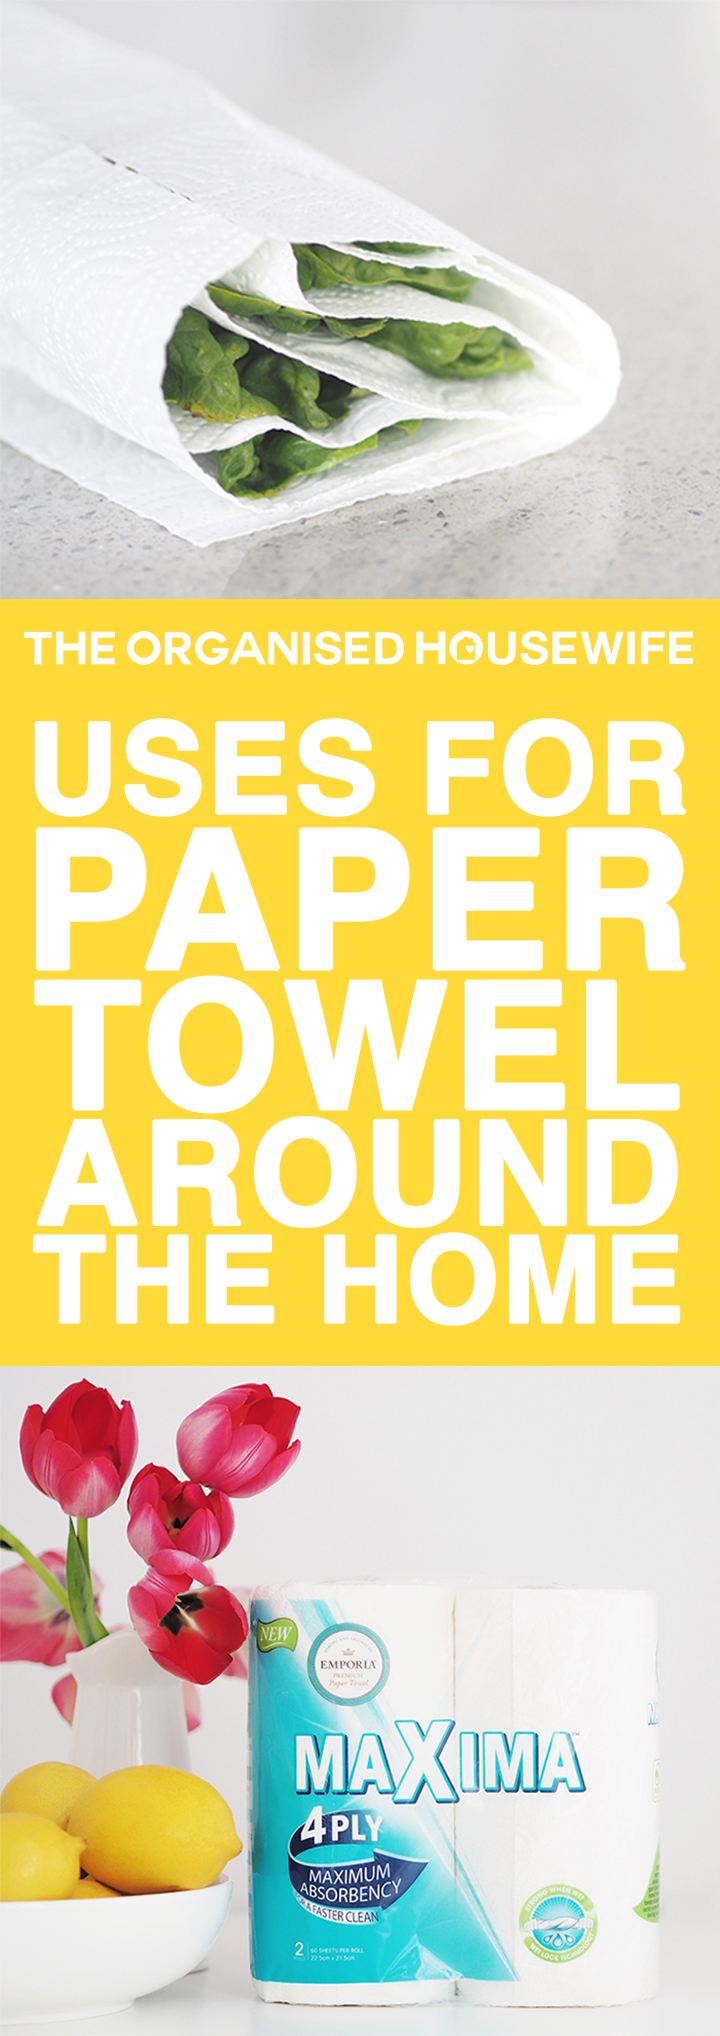 Paper towels are most commonly used for wiping up spills but did you know there are many more uses for the good ole paper towel? Here are some additional uses for paper towel around the home.